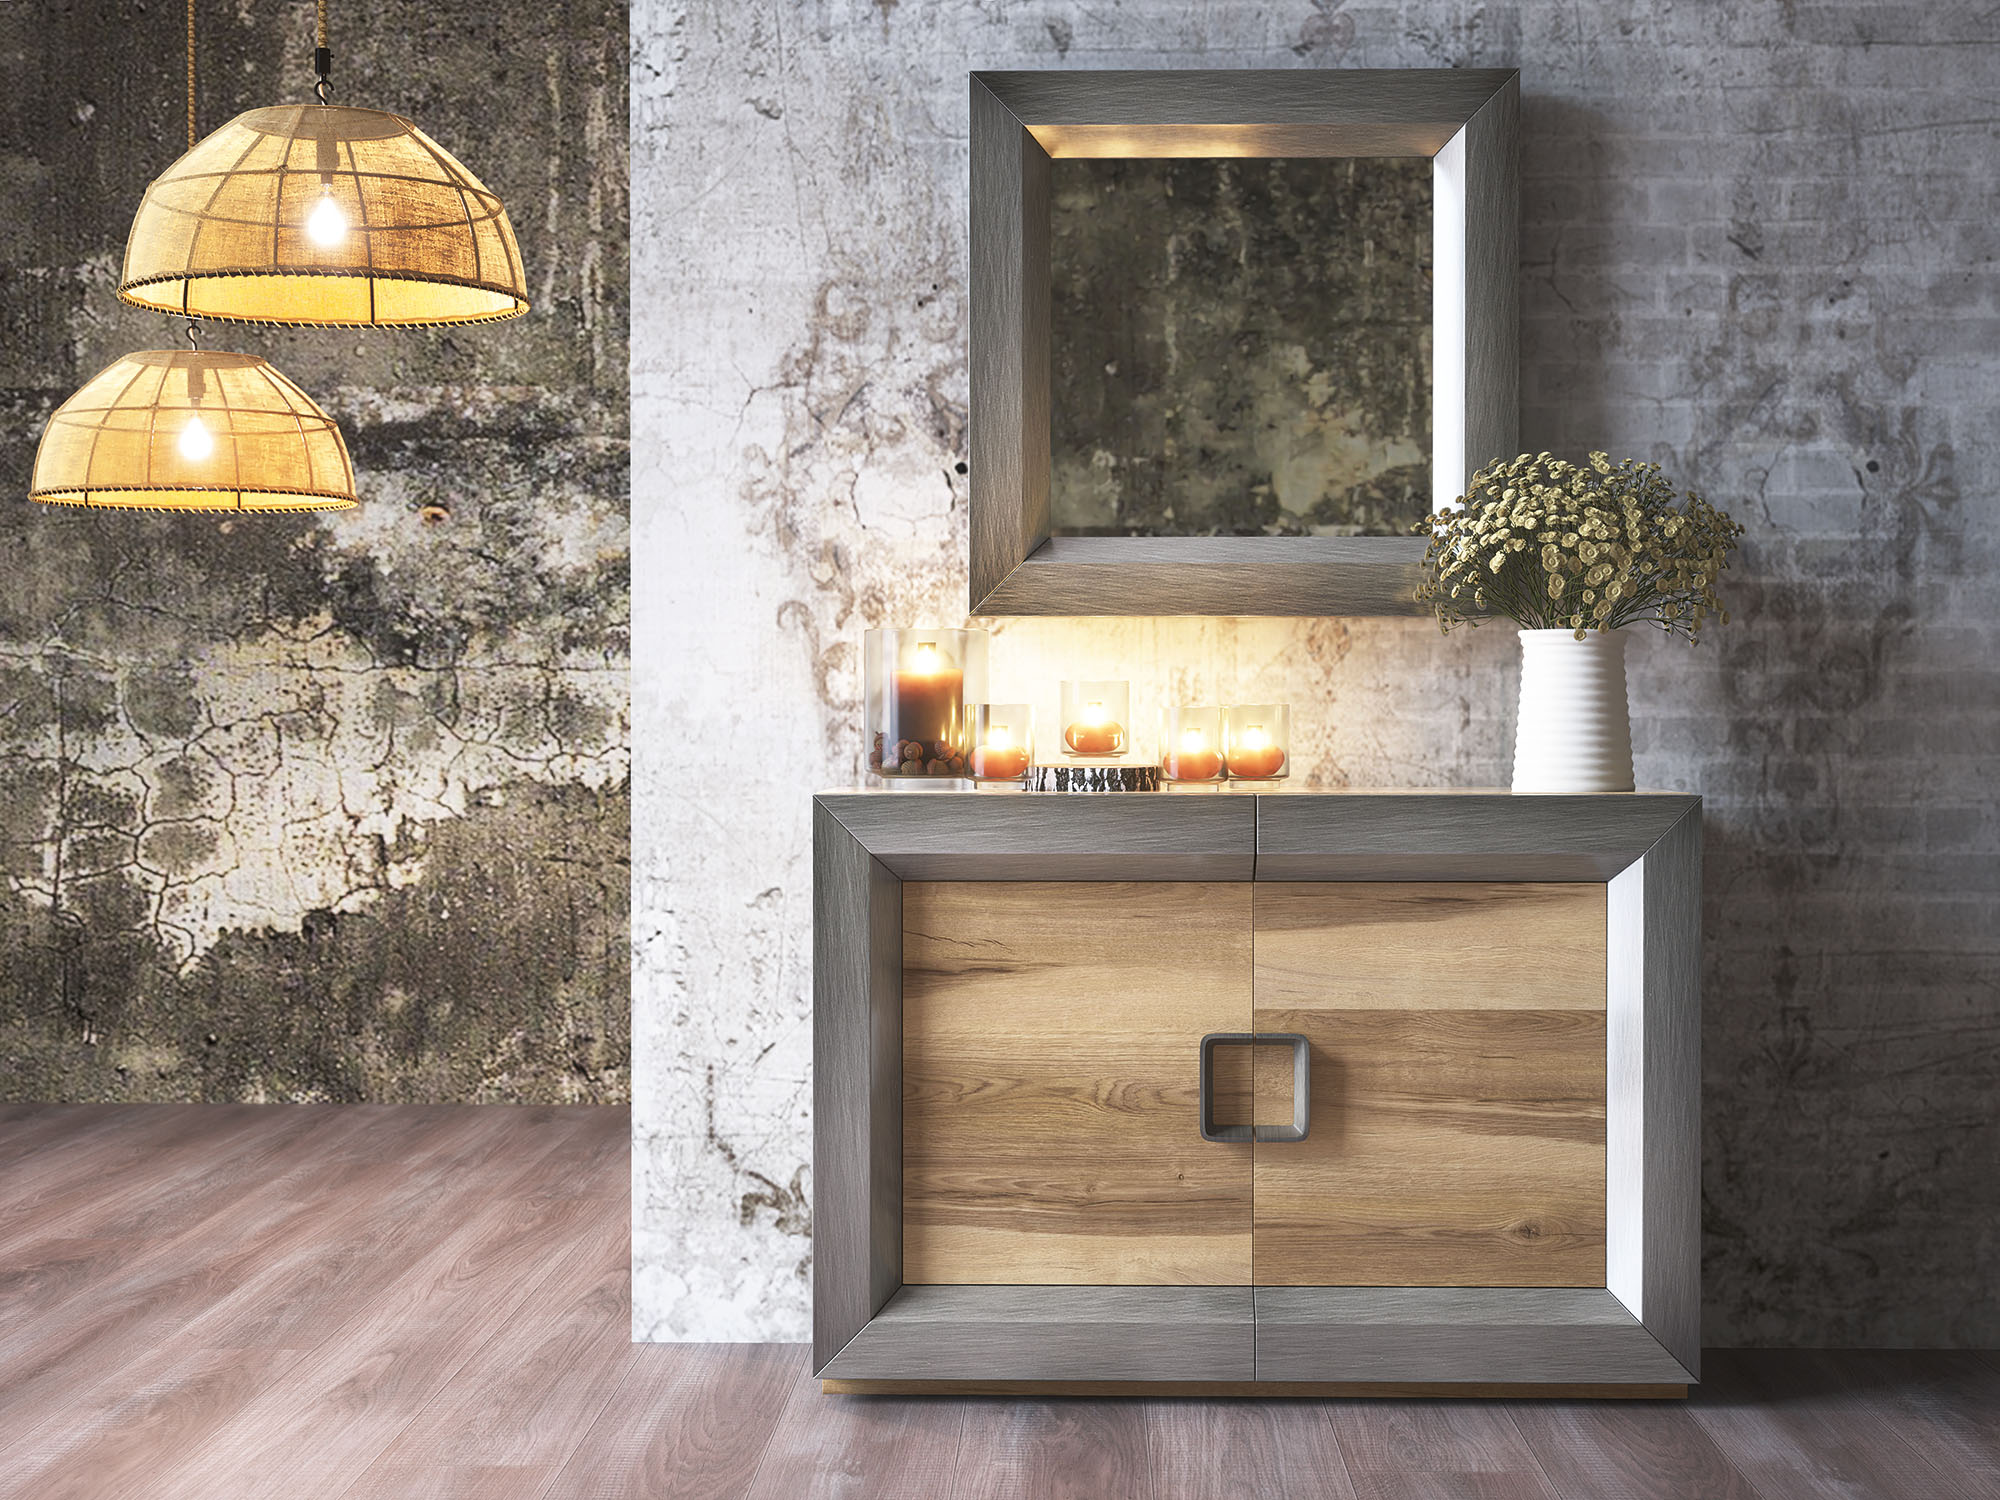 Brands Franco Kora Dining and Wall Units, Spain ZII.07 SHOE CABINET